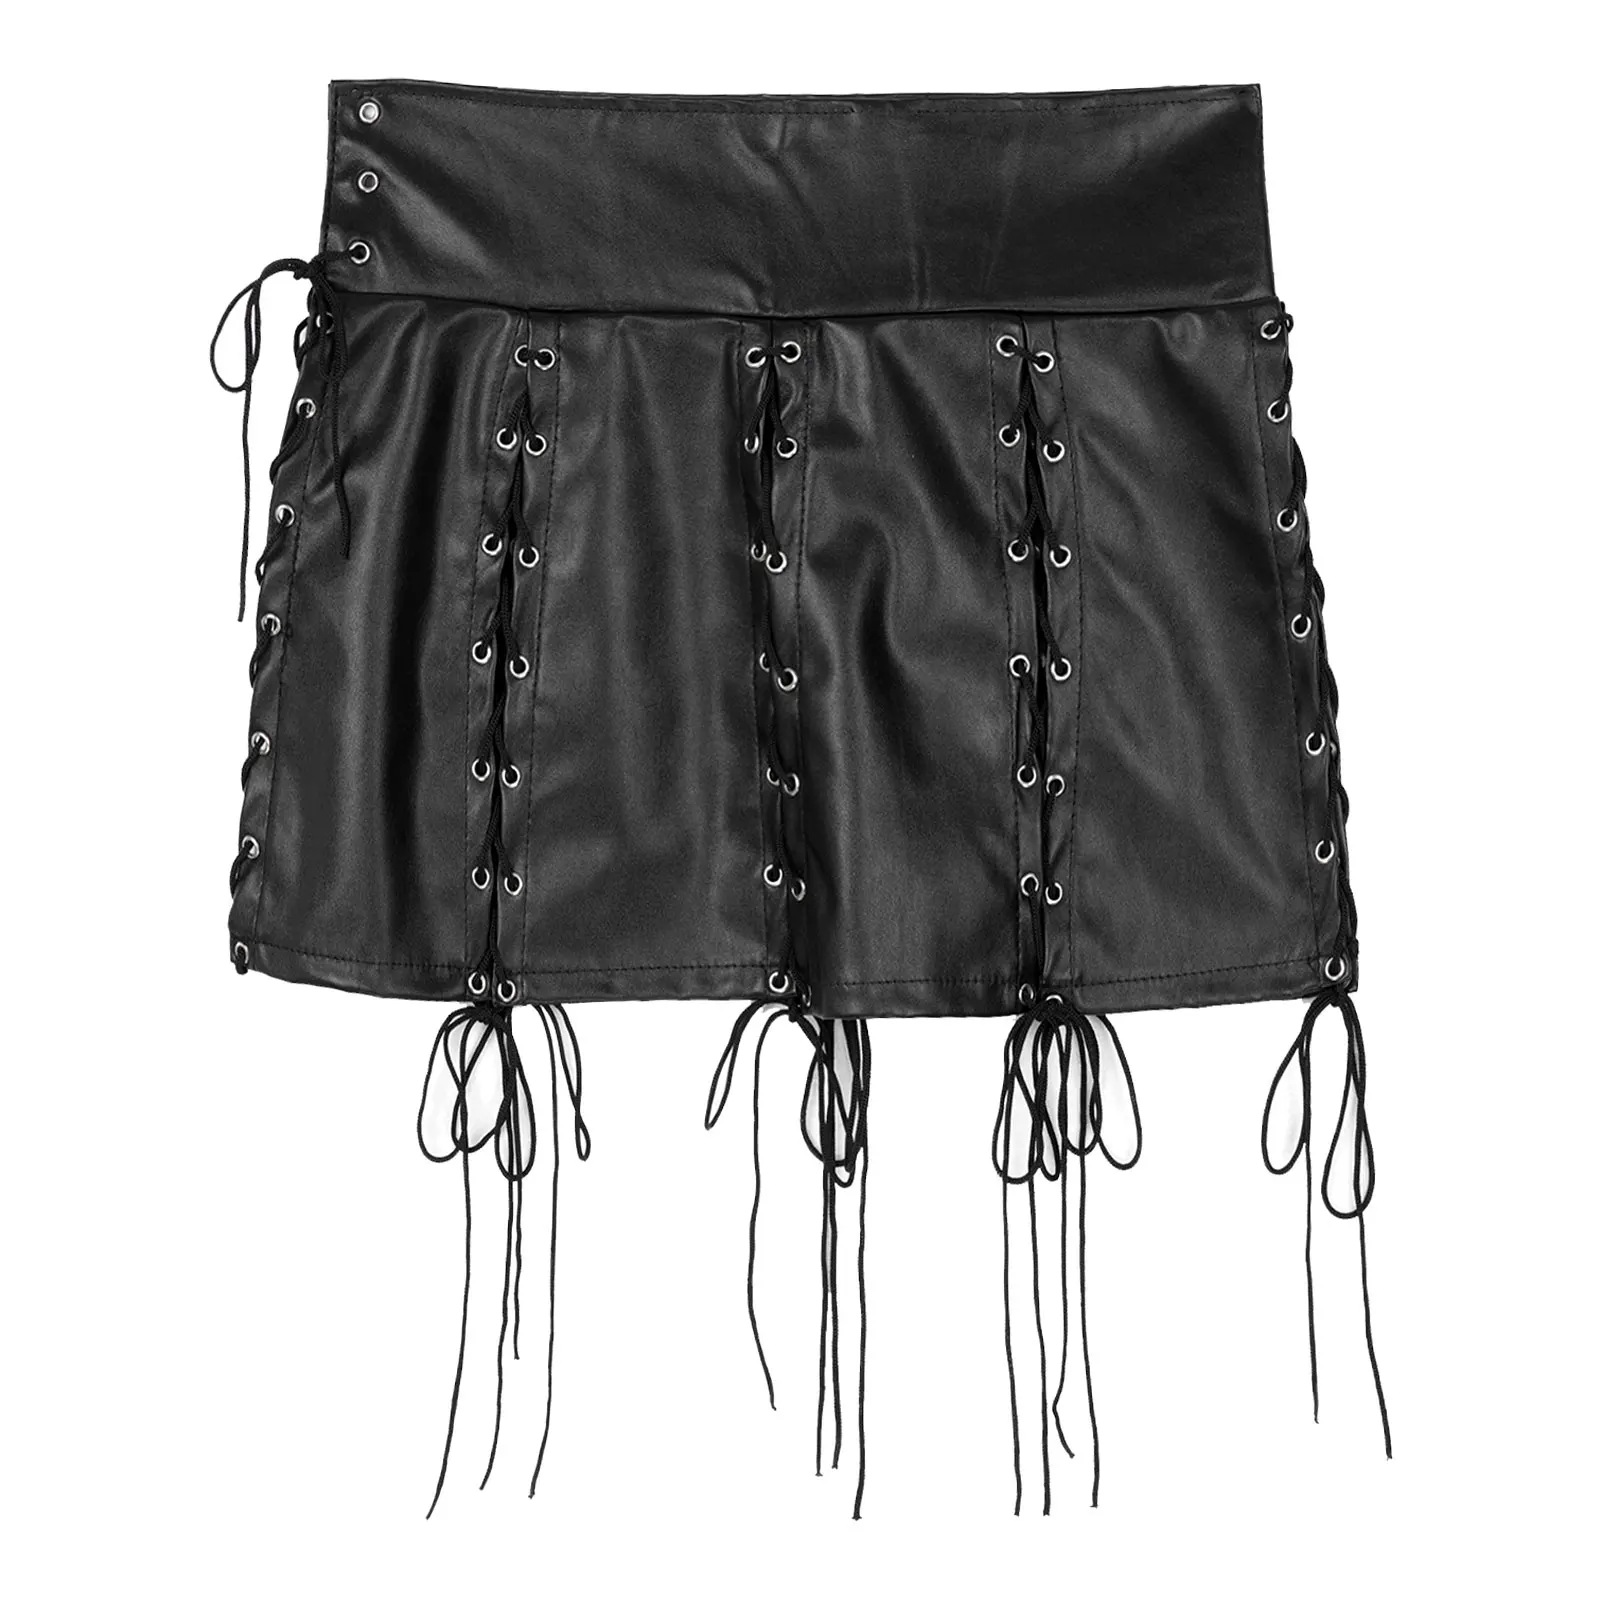 Ladies Women Sexy Skirt Gothic Fashion Punk Hollow Out Lace-up Wetlook Faux Leather Skirt Nightclub Party Rock Concert Miniskirt